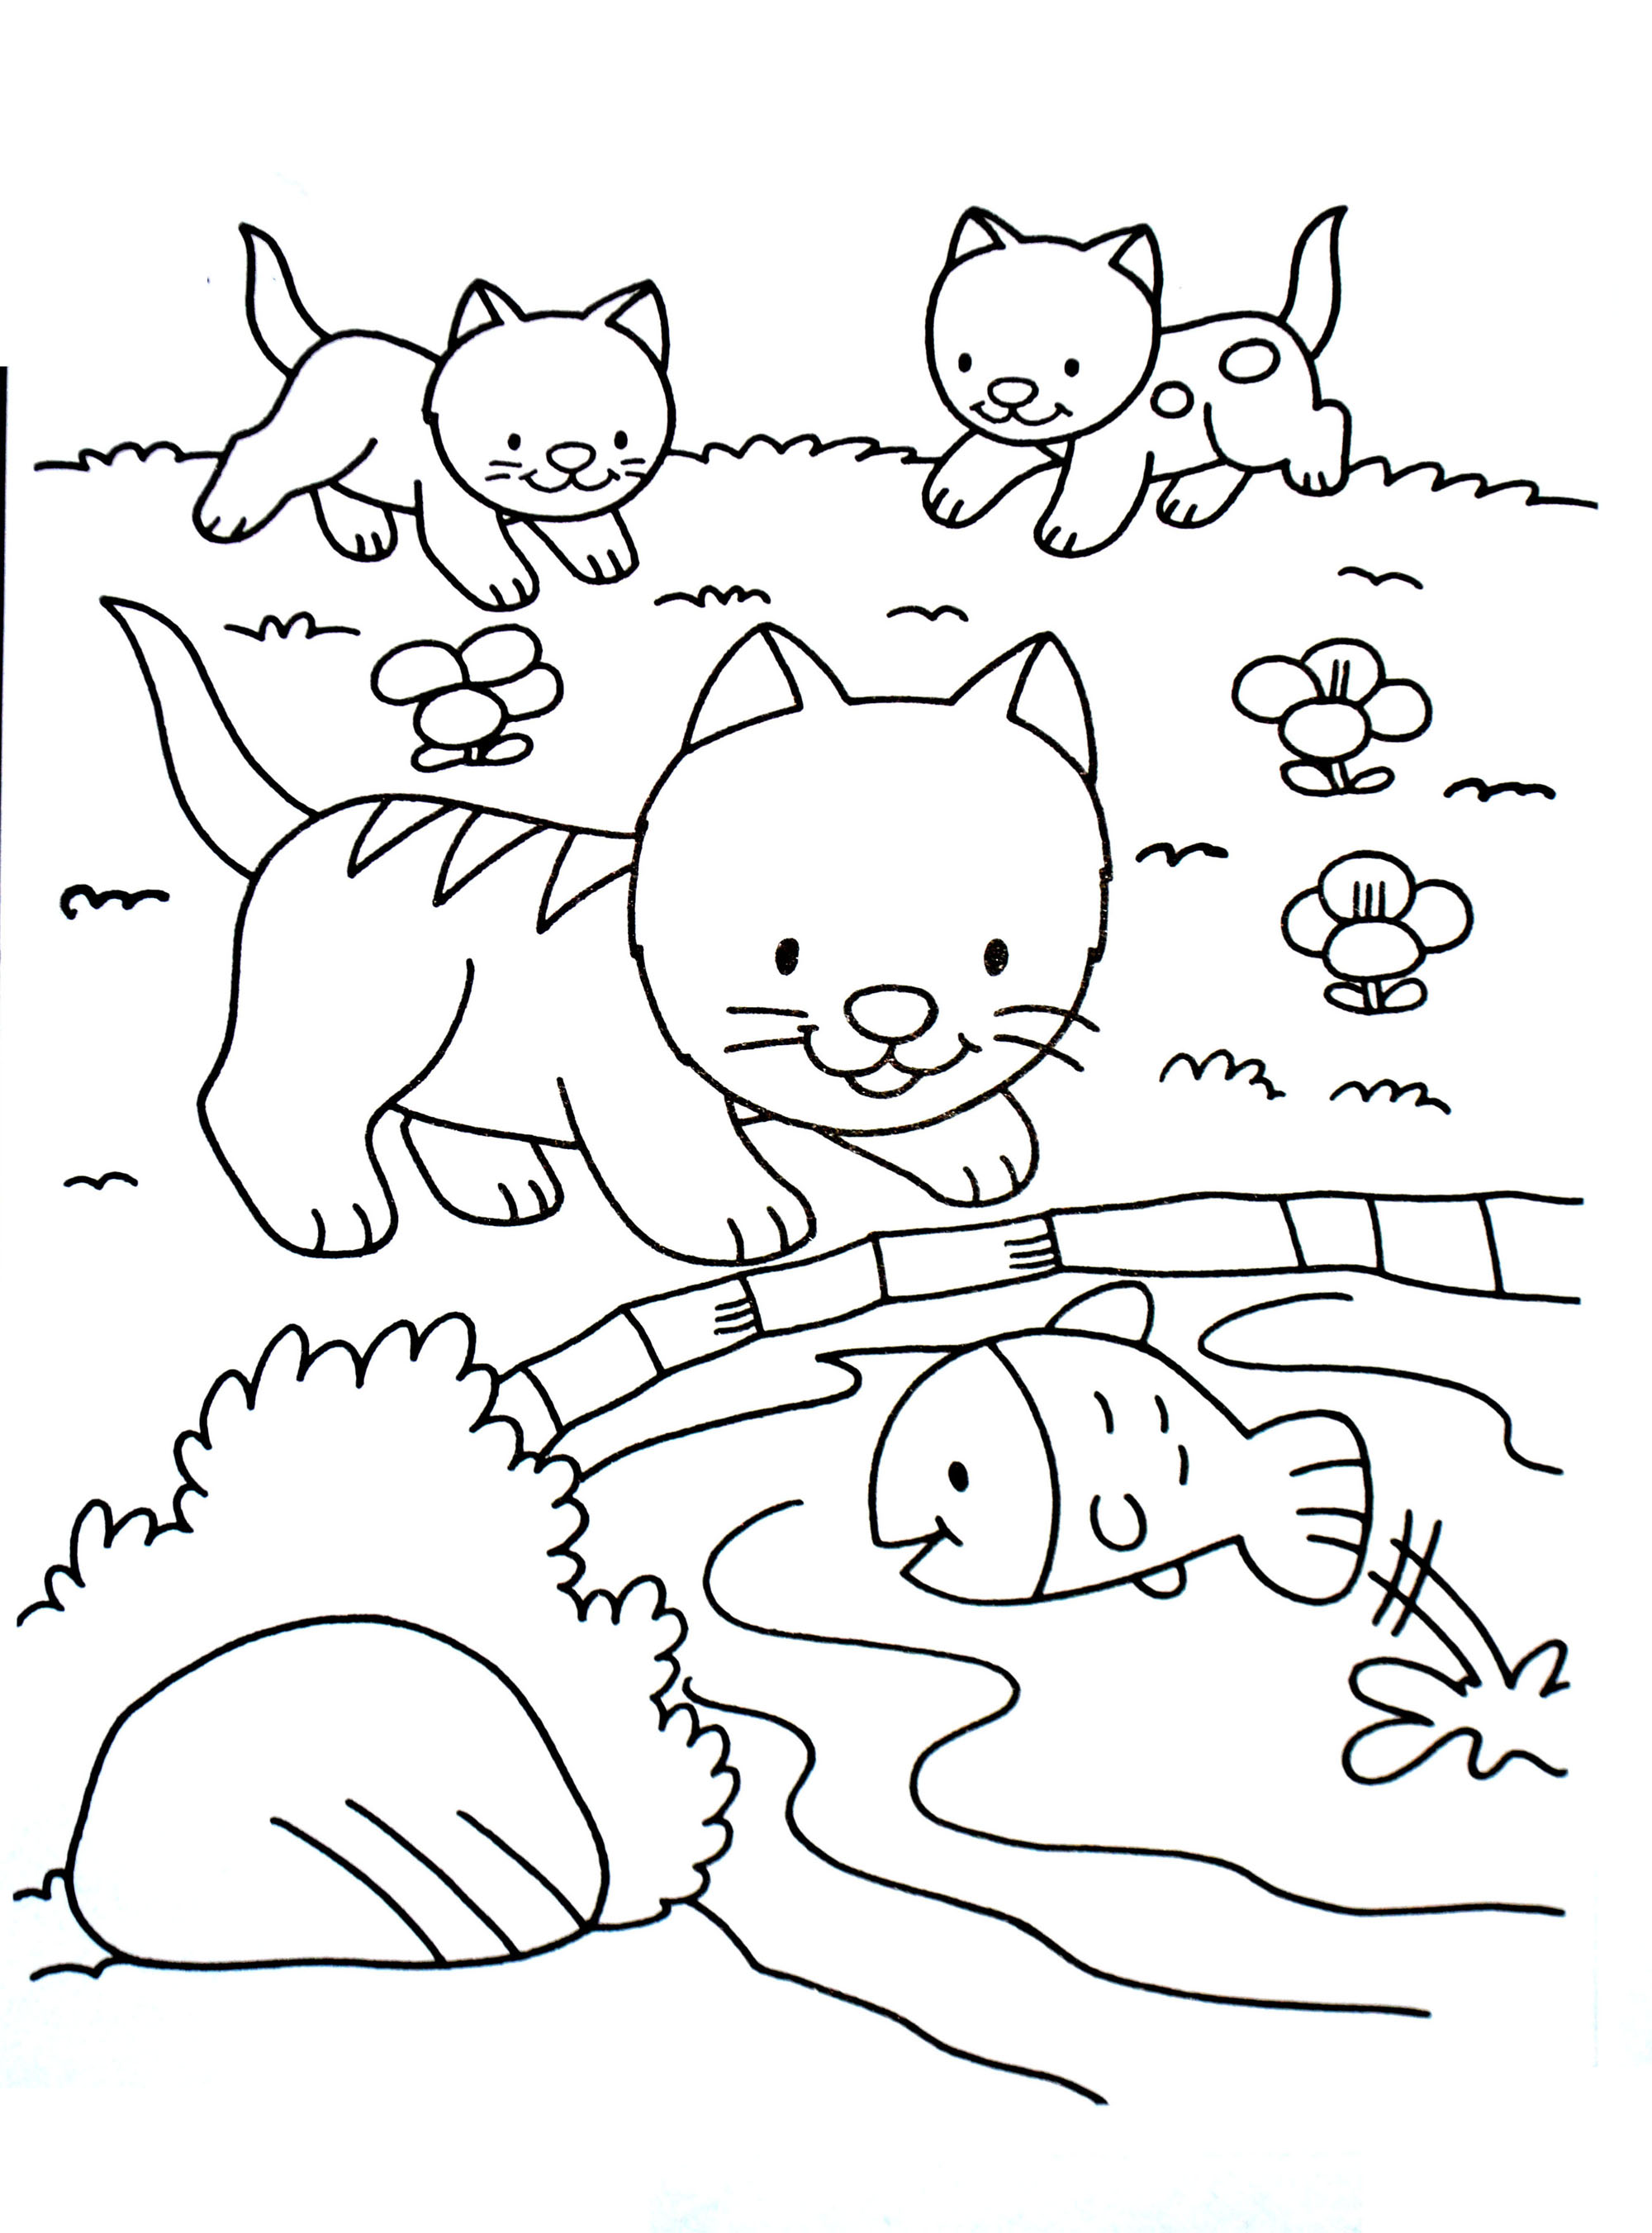 Cute coloring page with kittens - Cats Kids Coloring Pages